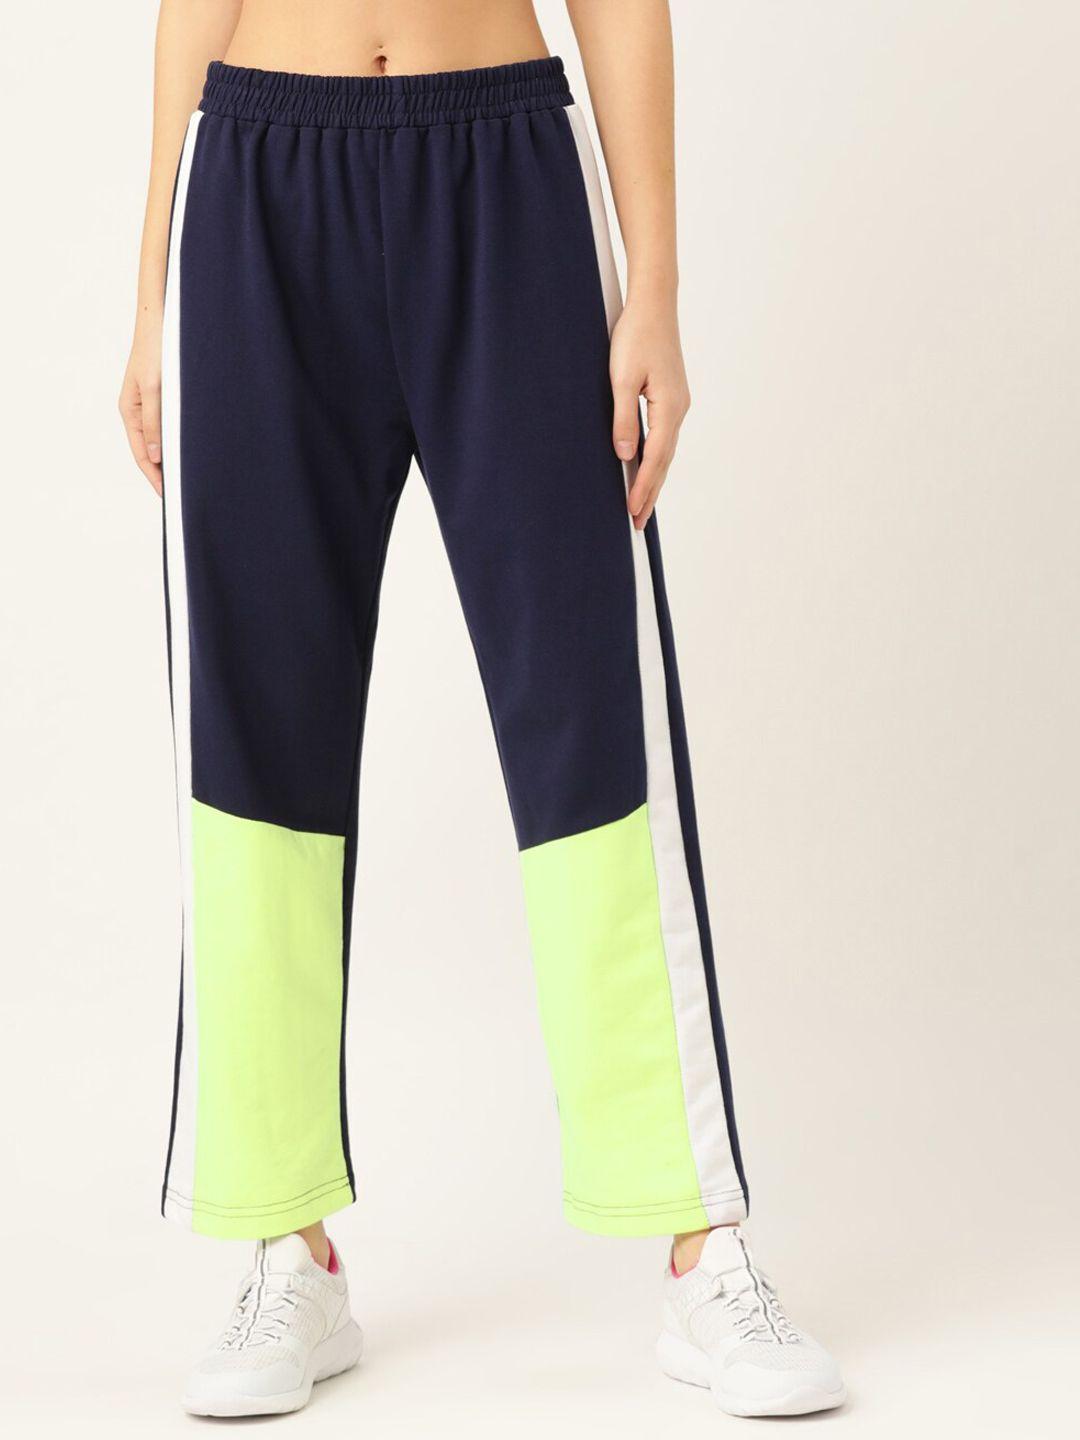 laabha-women-navy-blue-&-lime-green-colourblocked-staight-fit-track-pants